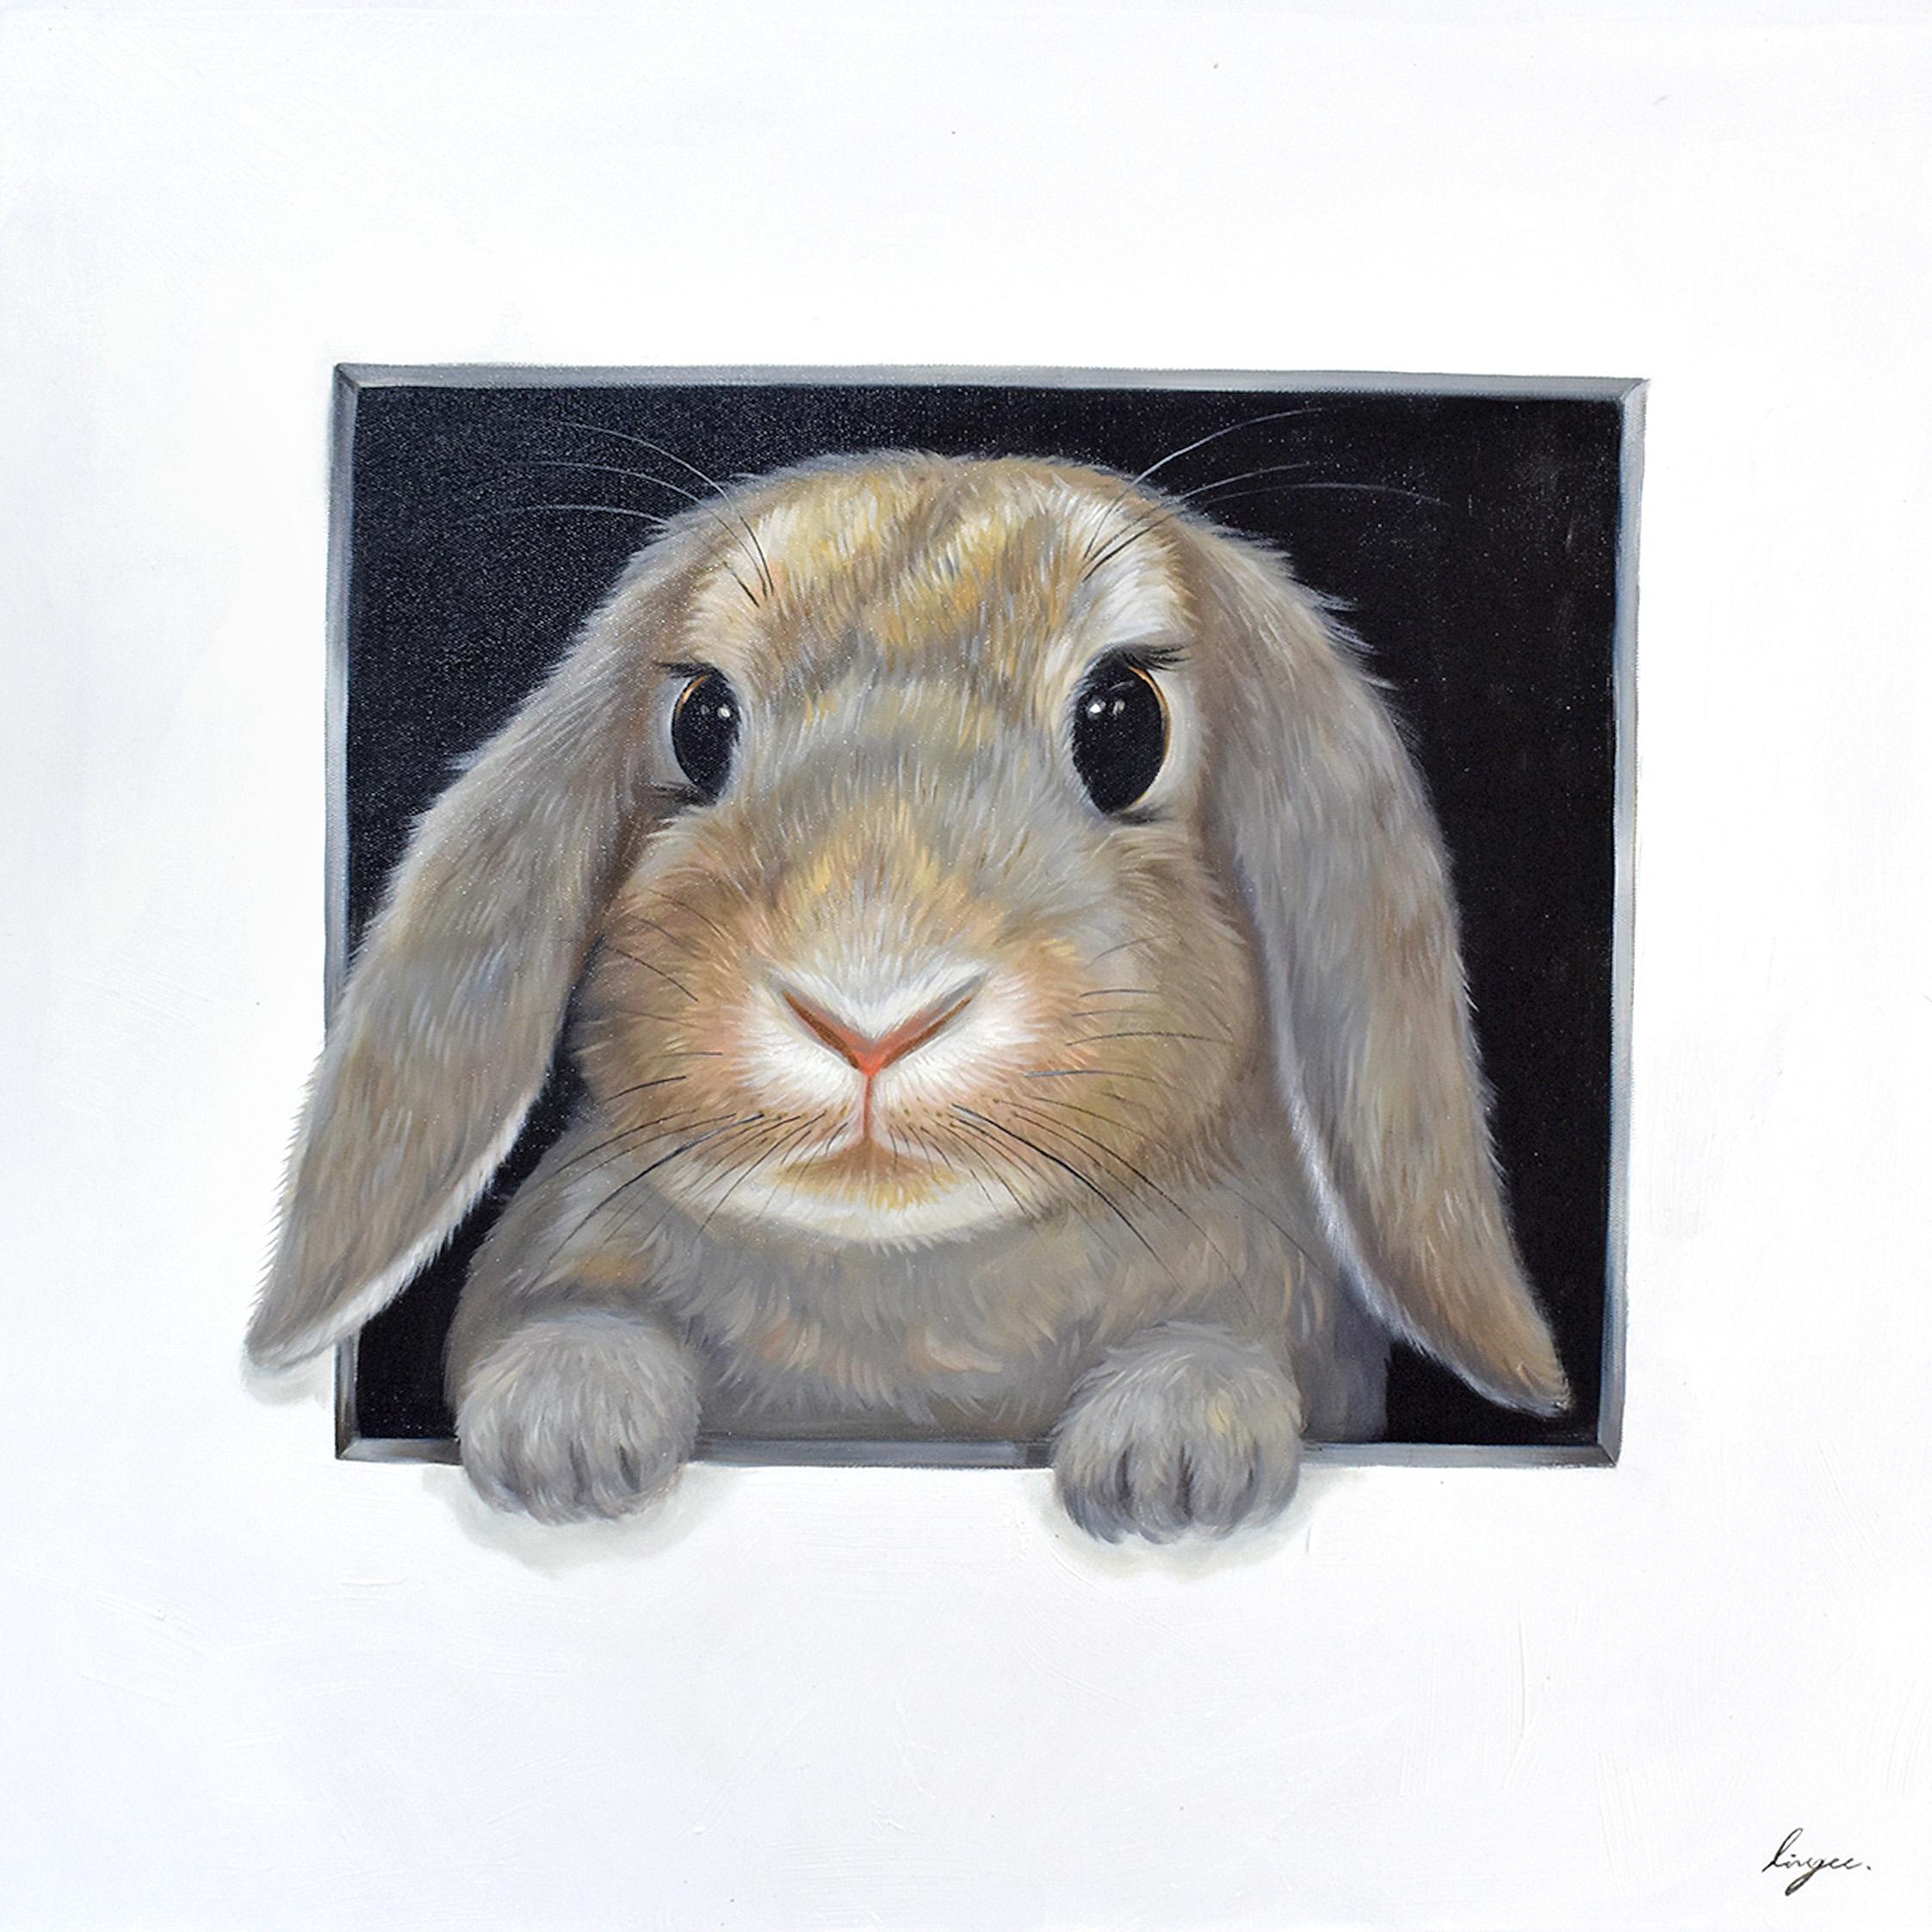 Lingee Bangkhuntod Animal Painting - Hare In Hole 7. Rabbit looking Through a Hole. Adorable rabbit Oil painting